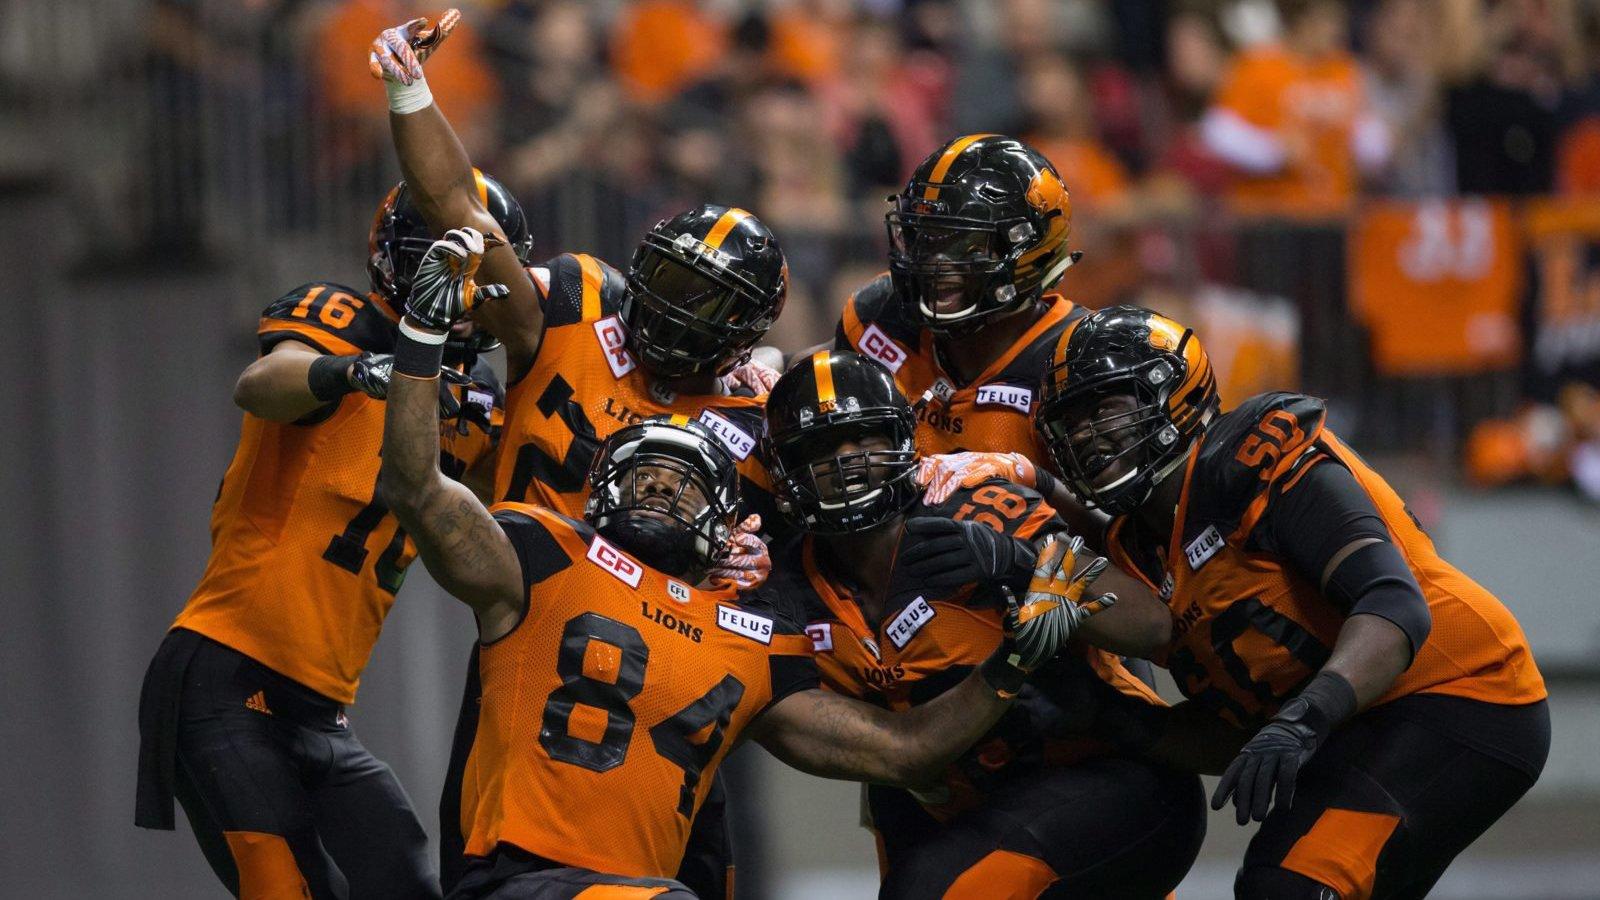 CFL Week 10 Betting: Lions vs. Stampeders Projected to Be Game of the Week